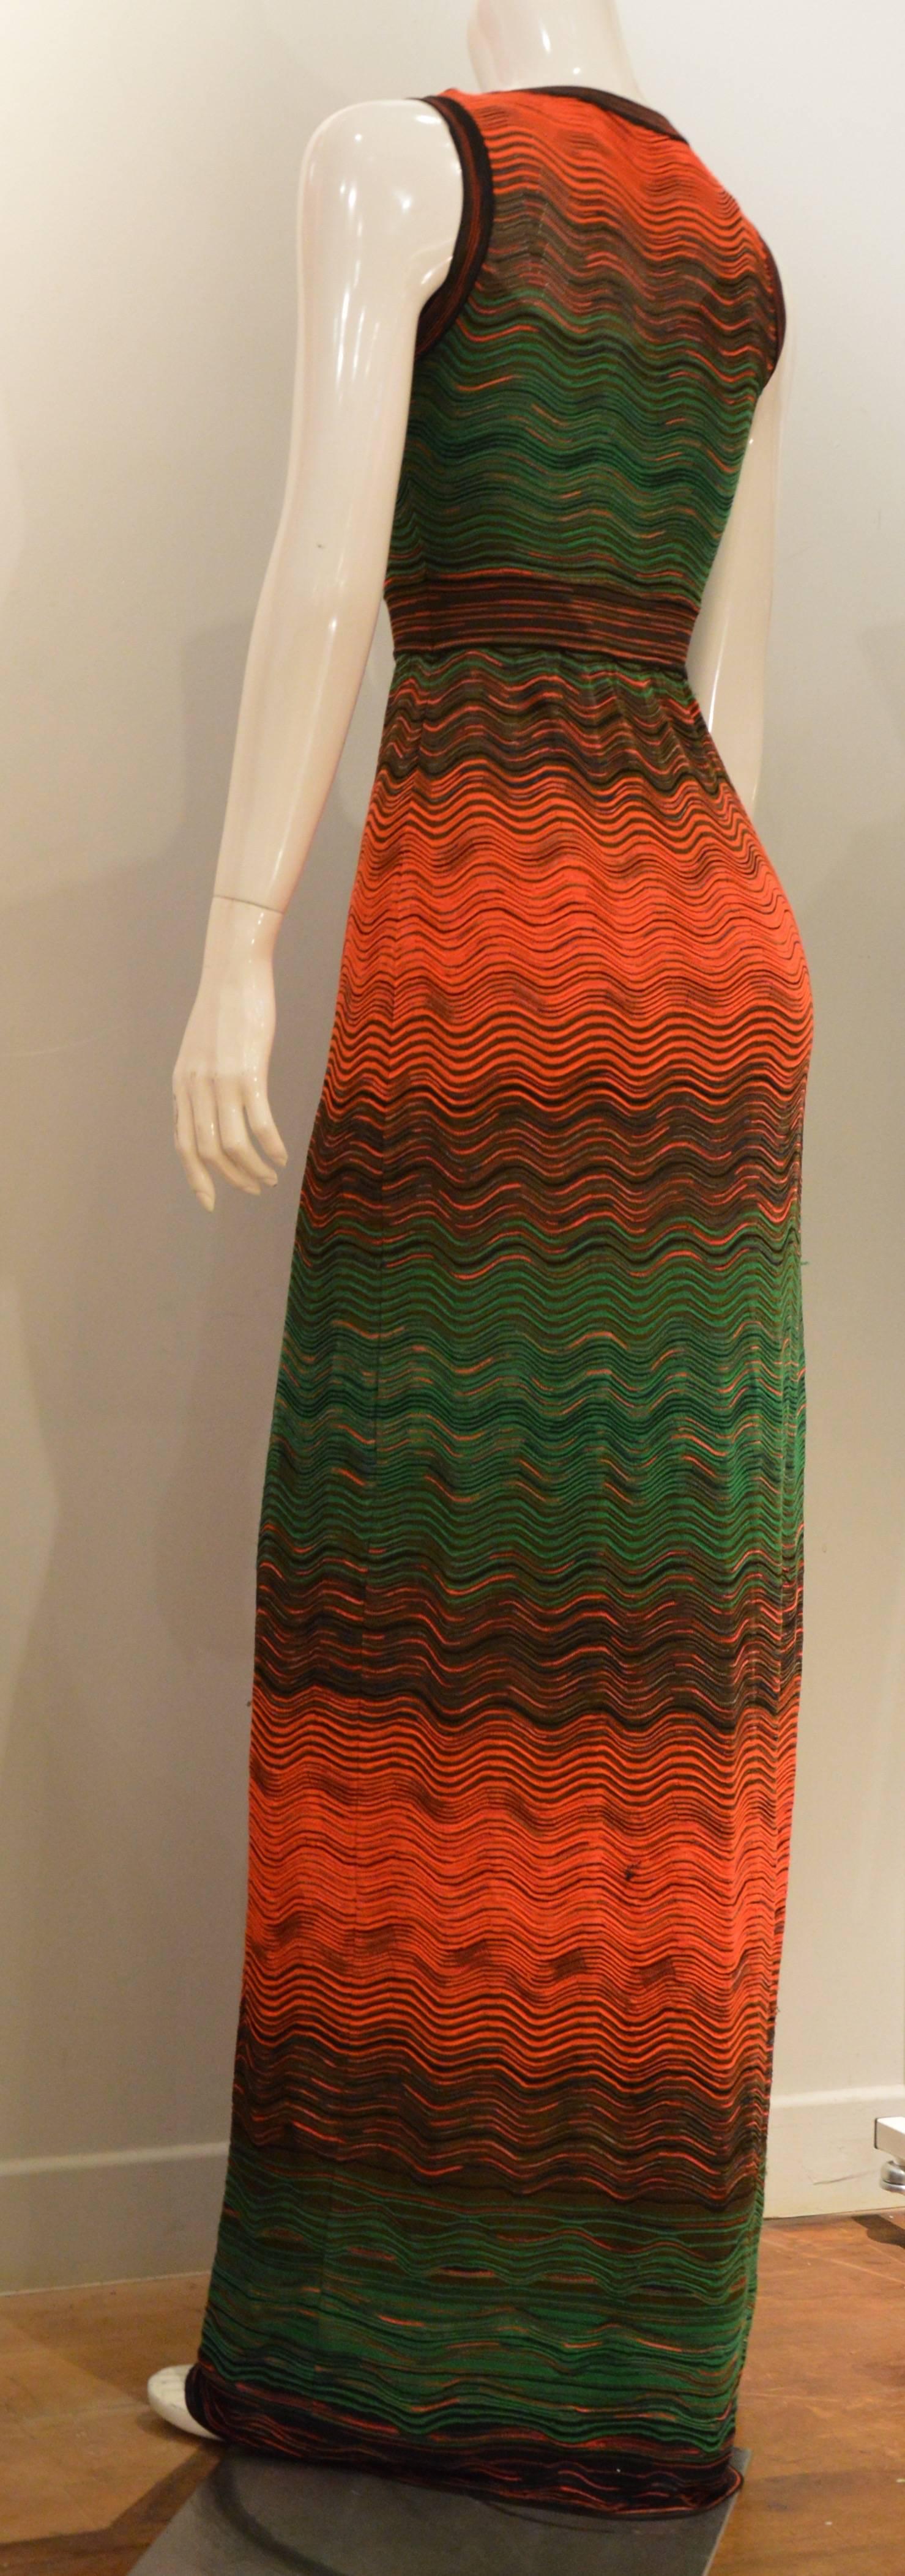 Very elegant and yet an edgy bohemian twist in this luxurious long Missoni dress: the essence of the Missoni House.
Day or night this gown is sophisticated.
Stretchy Fabric , size 38.
Measurements : Bust / 72 cm, Waist / 72 cm , Total Length / 162